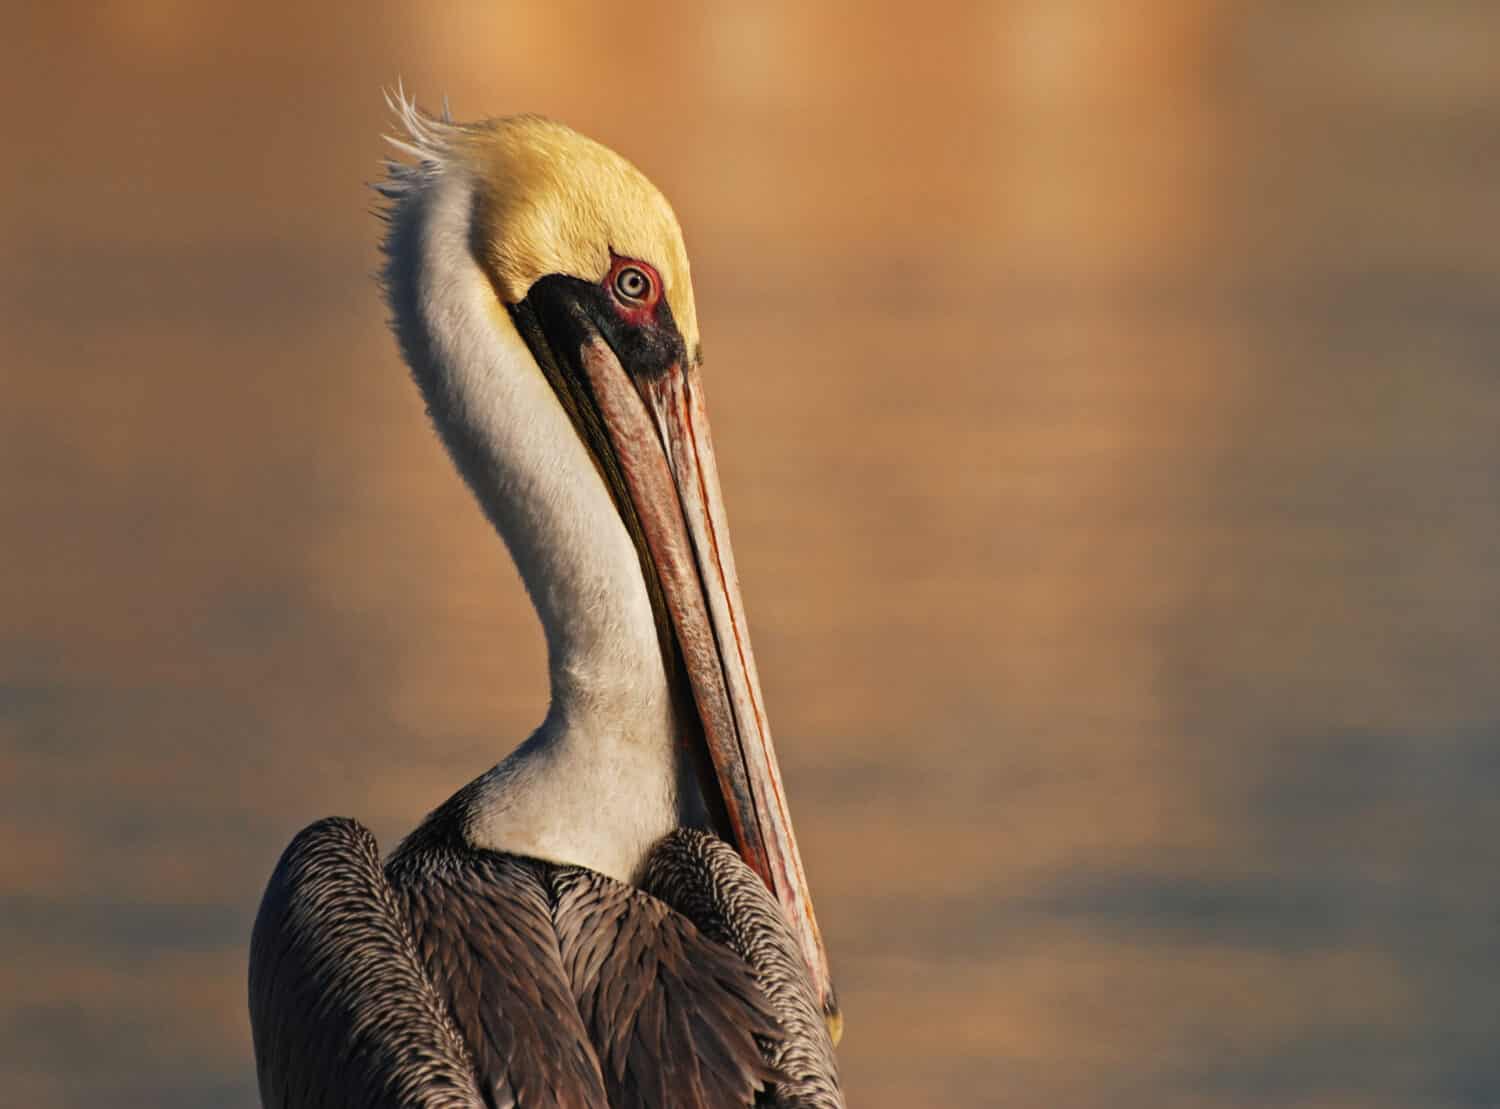 An image of a brown pelican